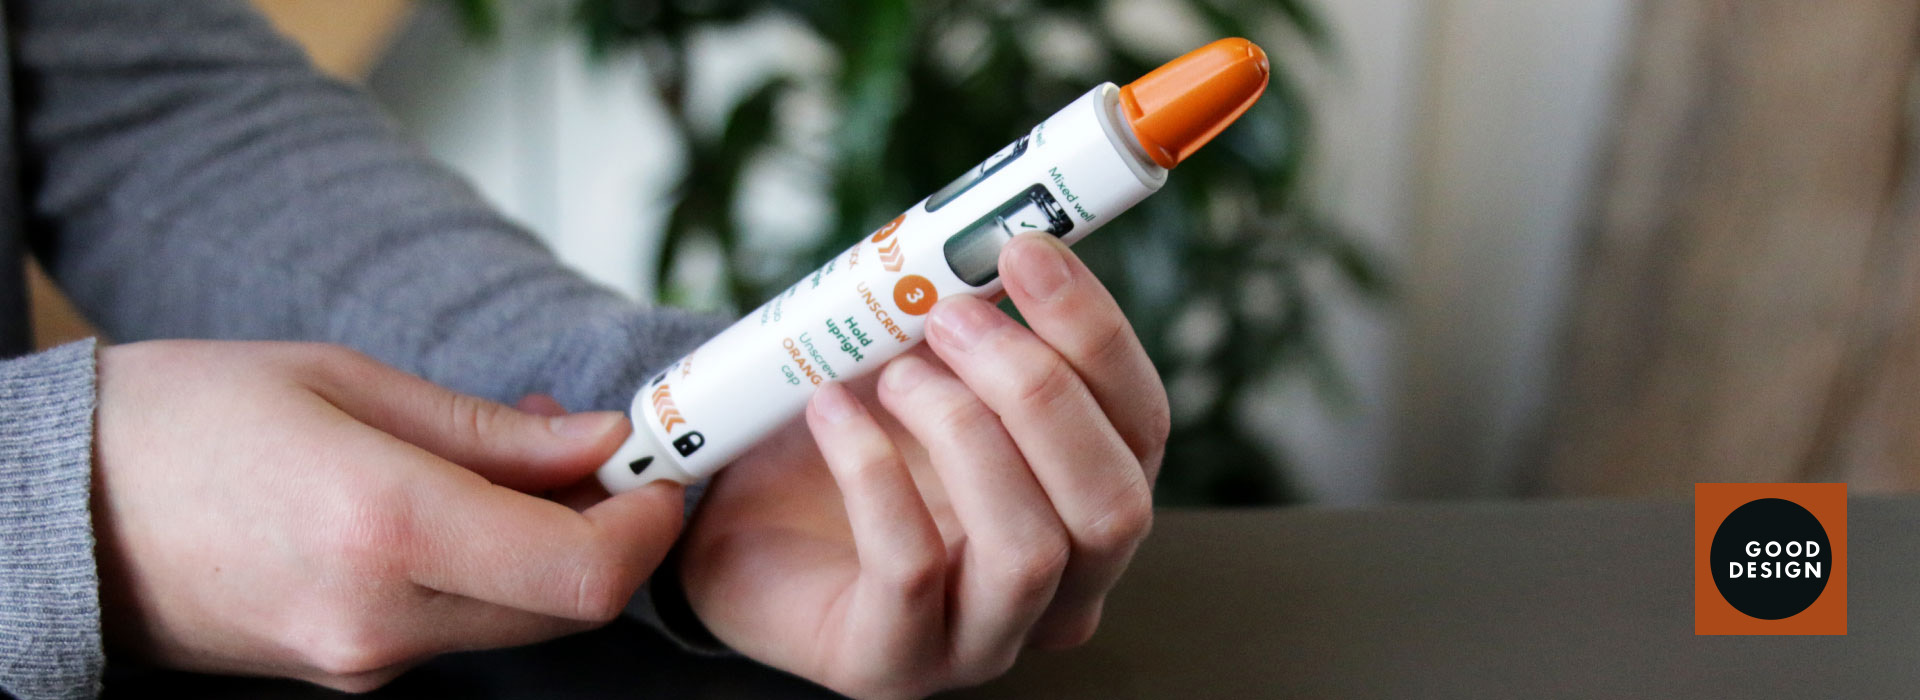 hands-holding-trainer-auto-injector-pen-with-logo-2